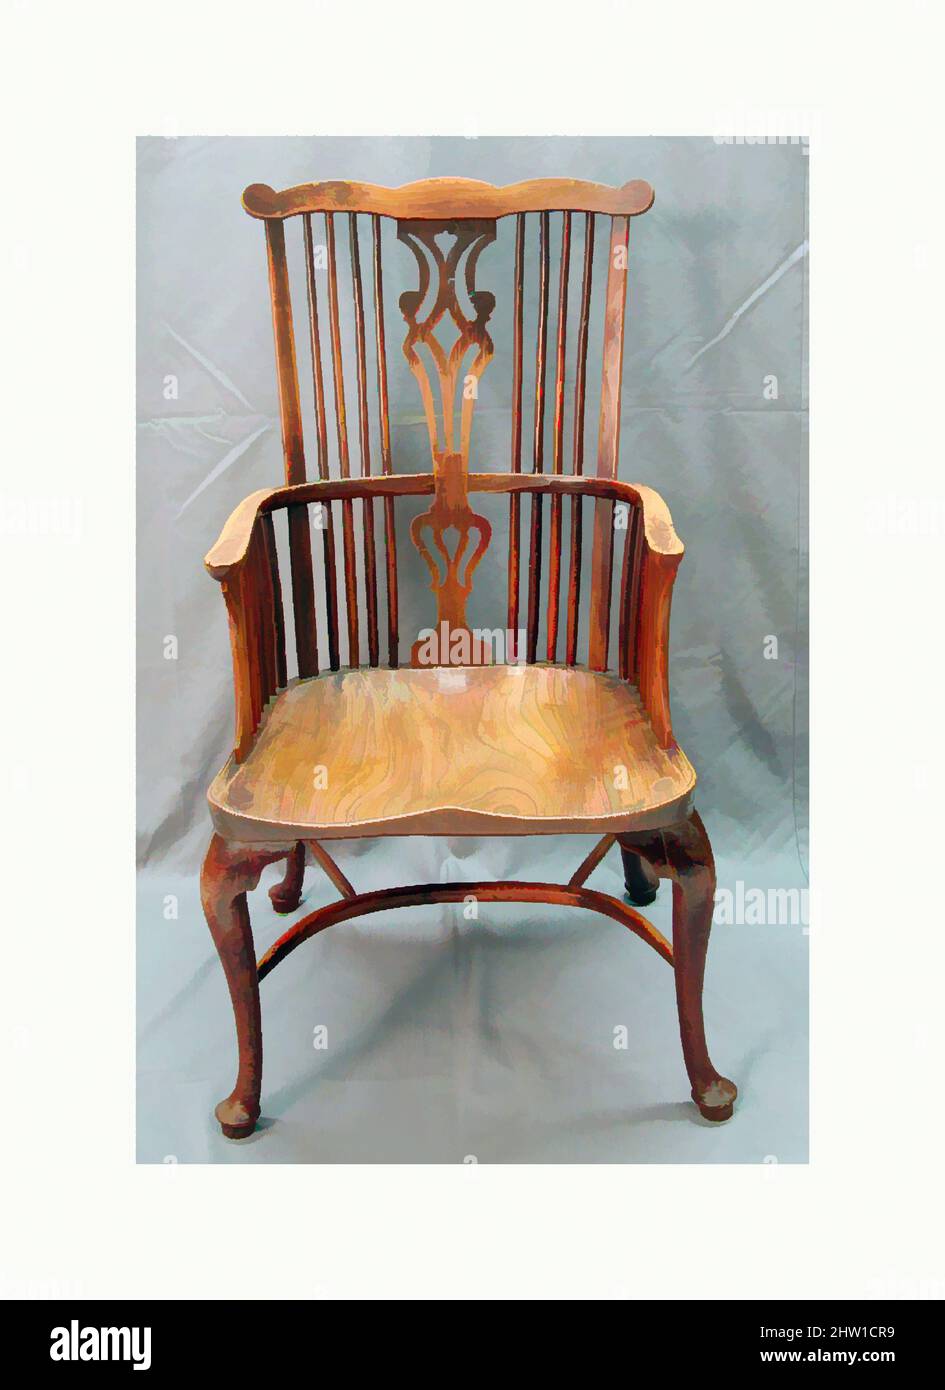 Art inspired by Comb-back Windsor armchair, ca. 1770, British, Yew and elm wood, Overall (confirmed): 44 1/8 × 23 1/2 × 26 1/2 in. (112.1 × 59.7 × 67.3 cm); Height (seat height): 18 in. (45.7 cm), Woodwork-Furniture, Nothing is more quintessentially English than a Windsor chair which, Classic works modernized by Artotop with a splash of modernity. Shapes, color and value, eye-catching visual impact on art. Emotions through freedom of artworks in a contemporary way. A timeless message pursuing a wildly creative new direction. Artists turning to the digital medium and creating the Artotop NFT Stock Photo